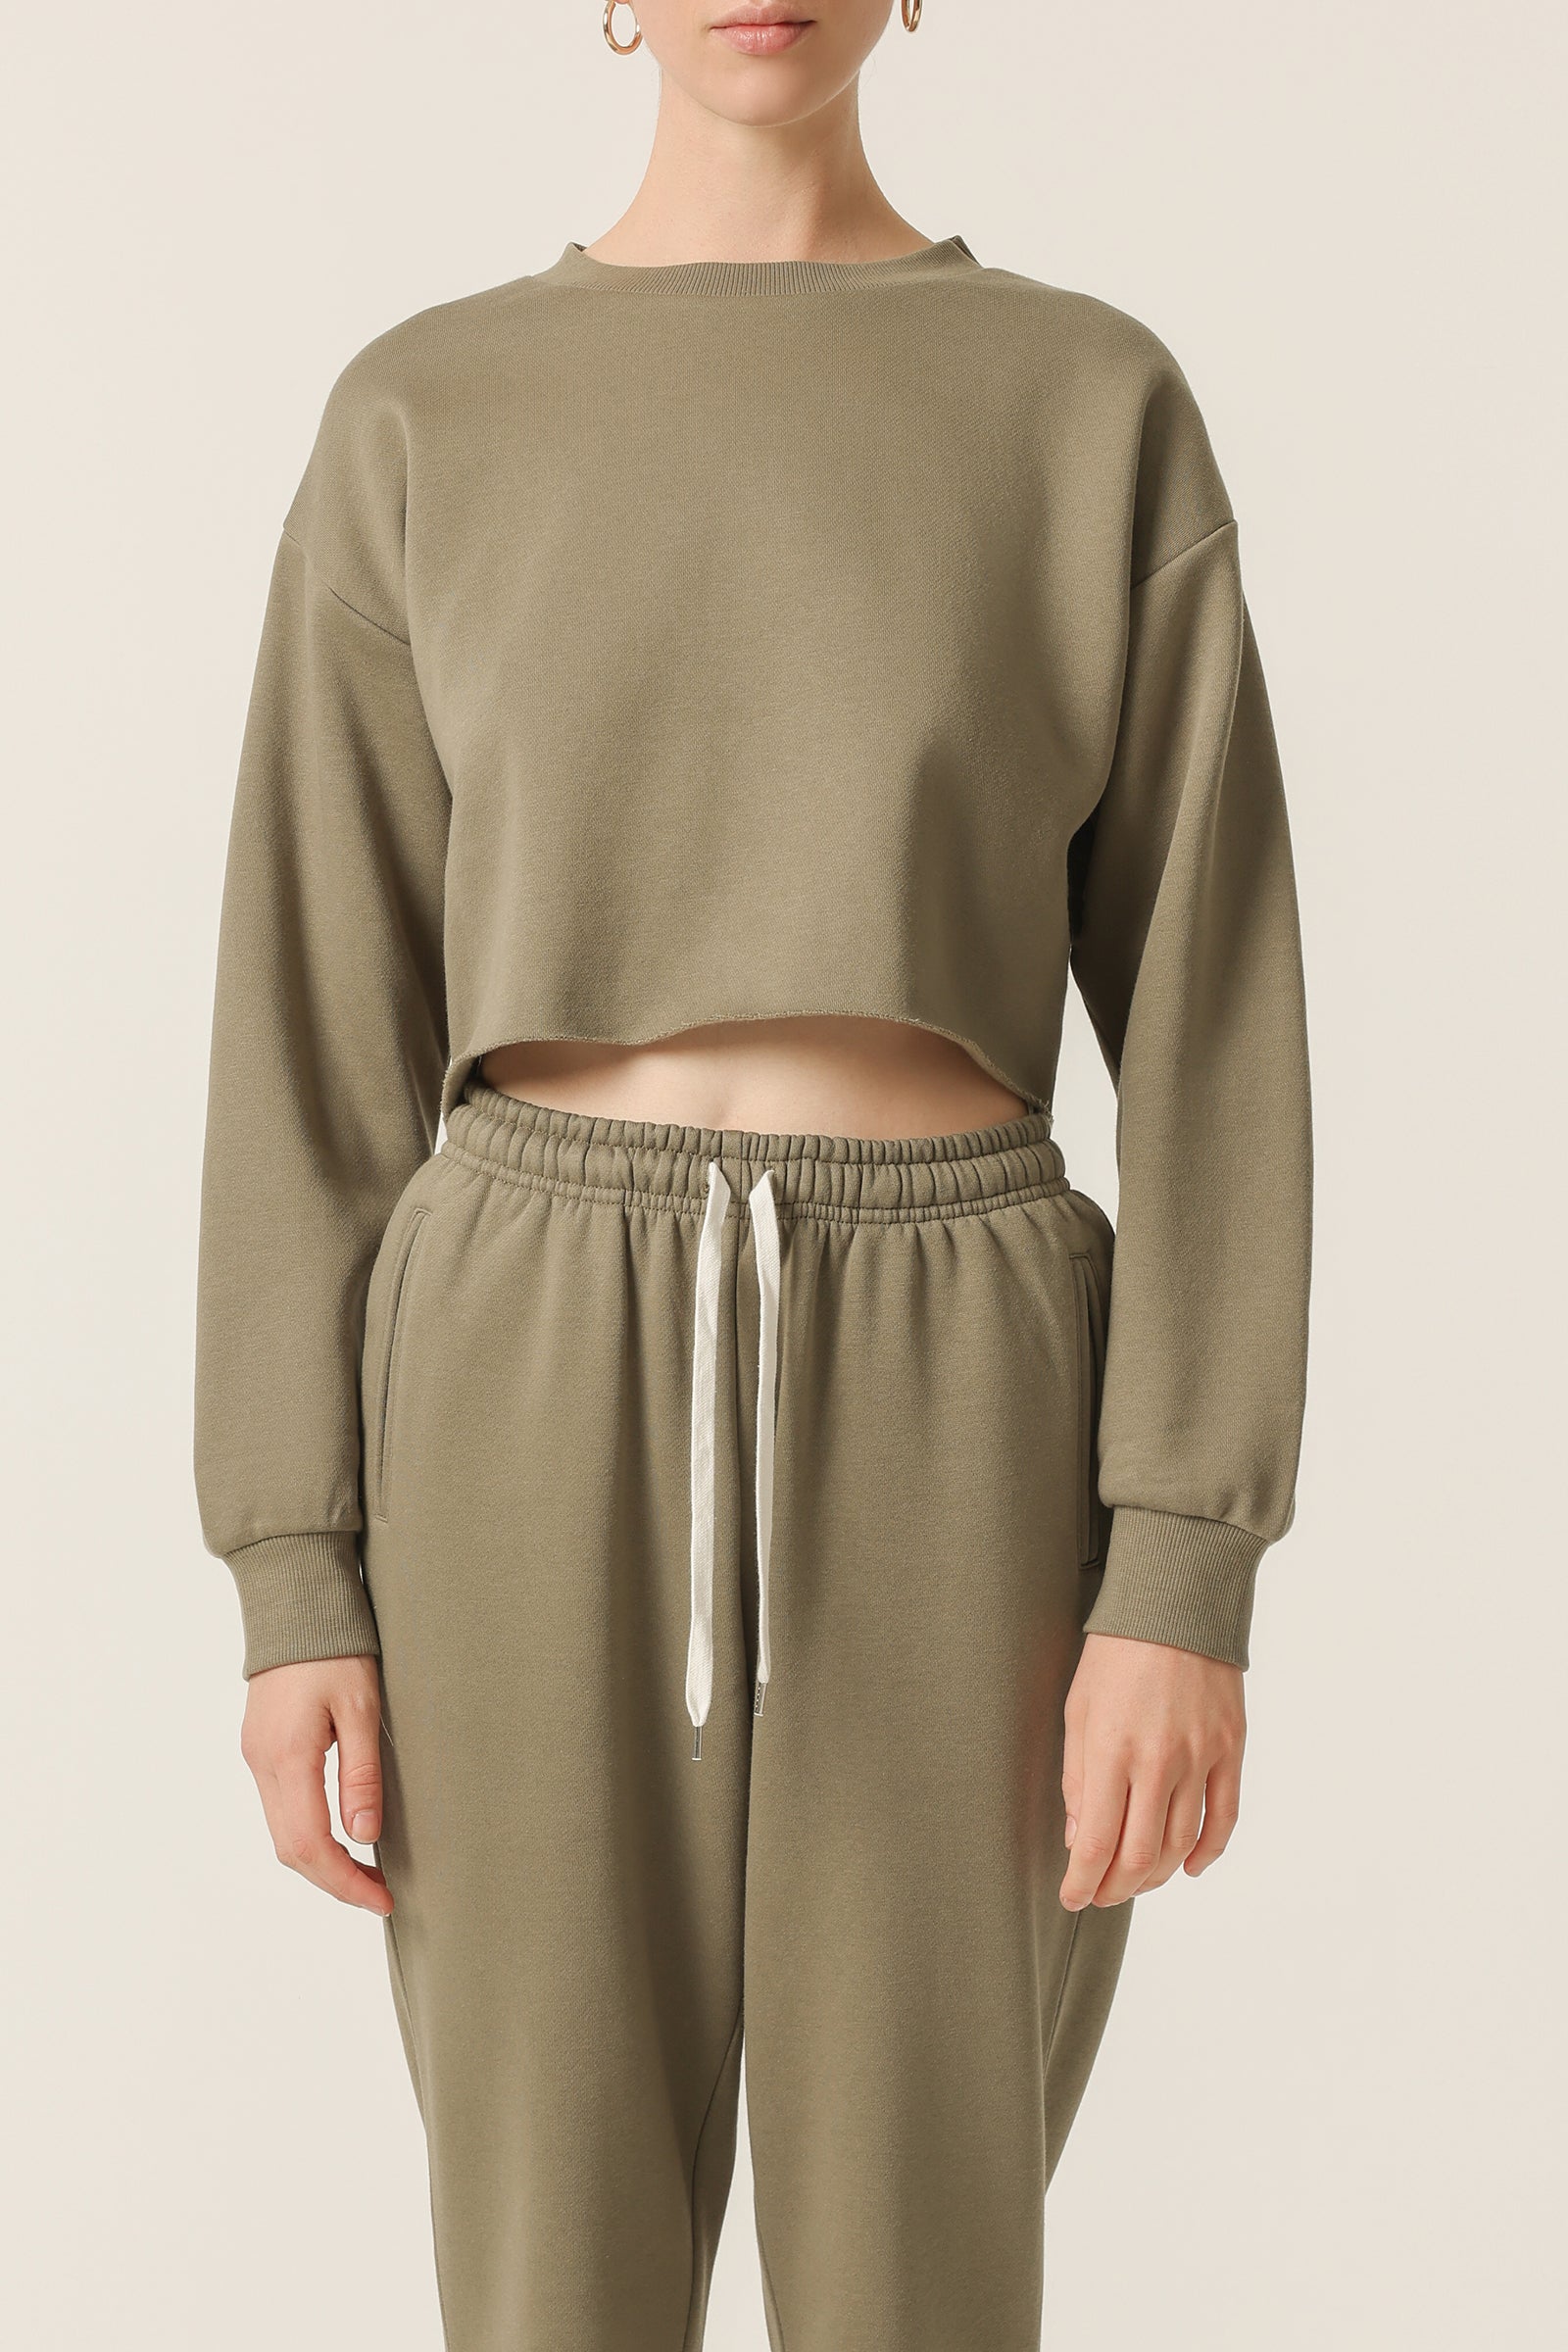 Nude Lucy Carter Classic Crop Sweat In a Green Willow Colour